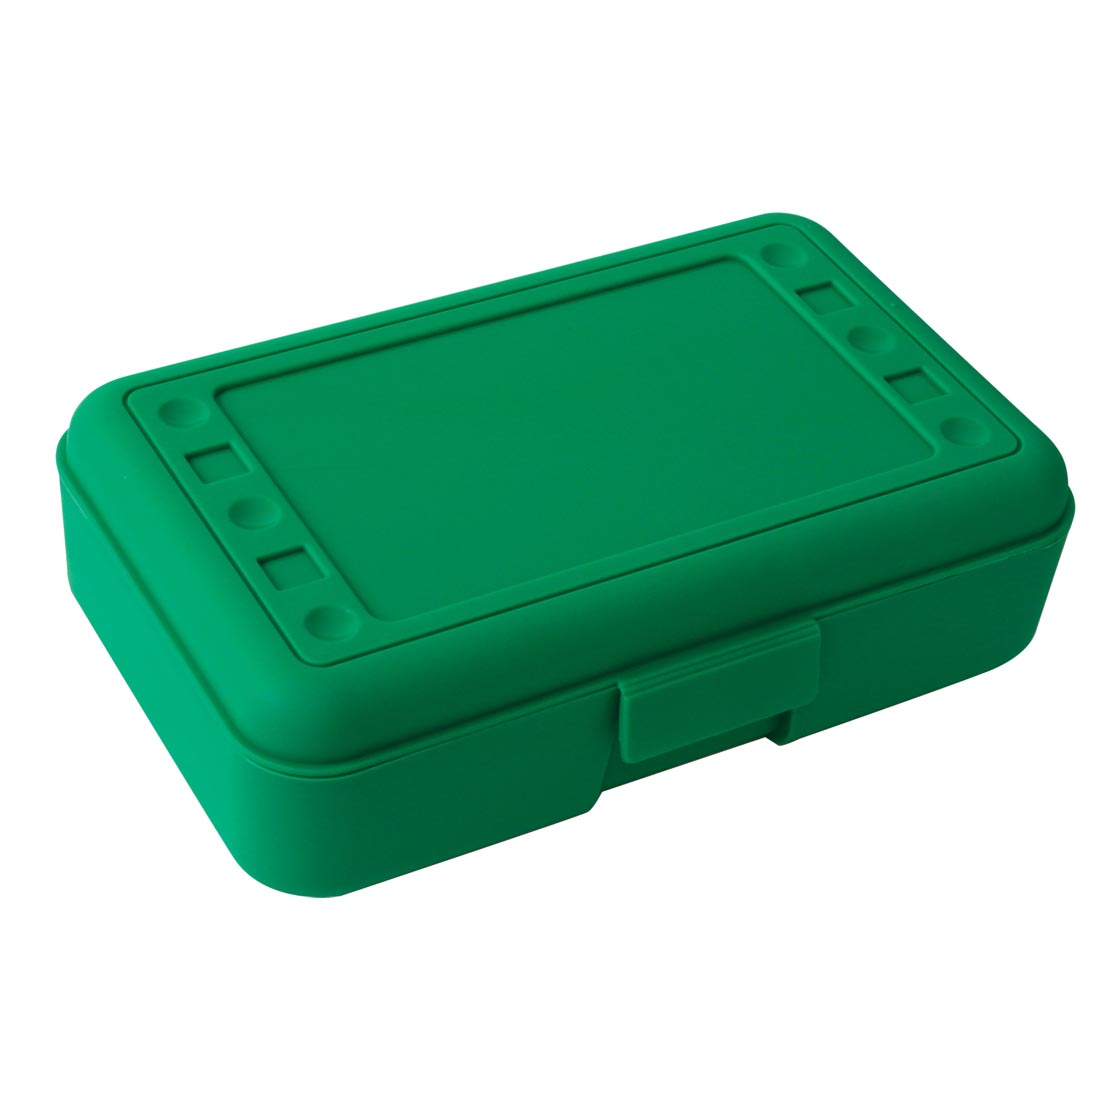 Plastic Pencil Box by Romanoff Products